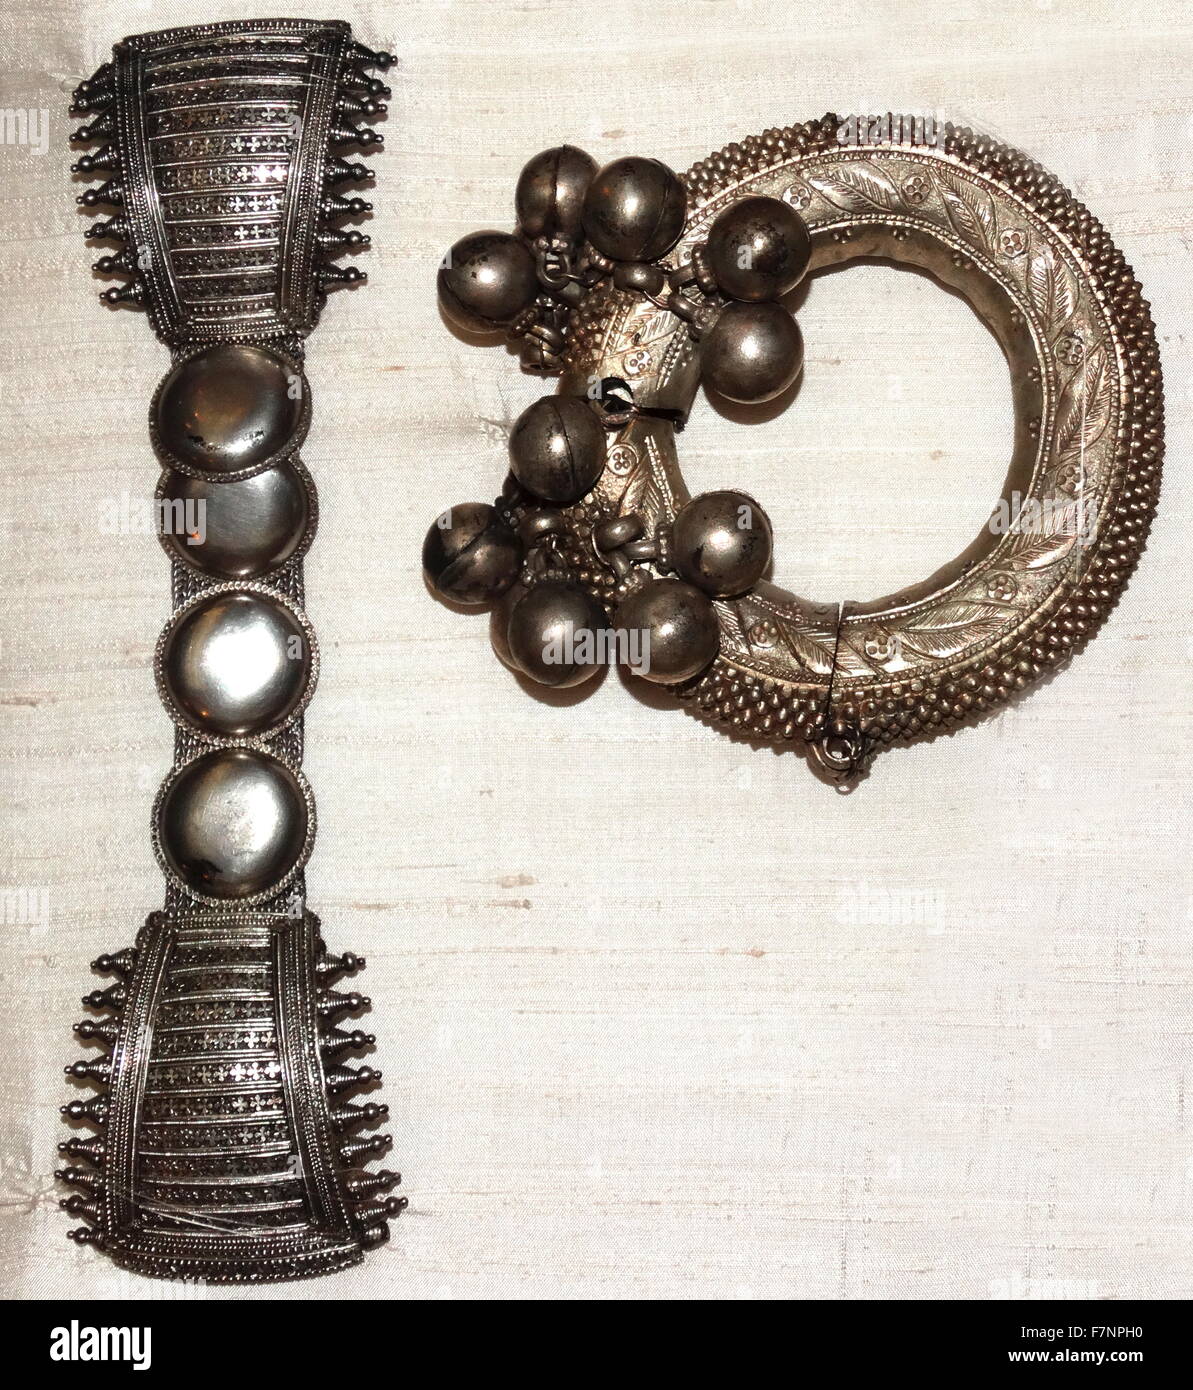 https://c8.alamy.com/comp/F7NPH0/19th-century-silver-bracelet-and-anklet-from-india-dated-1840-F7NPH0.jpg